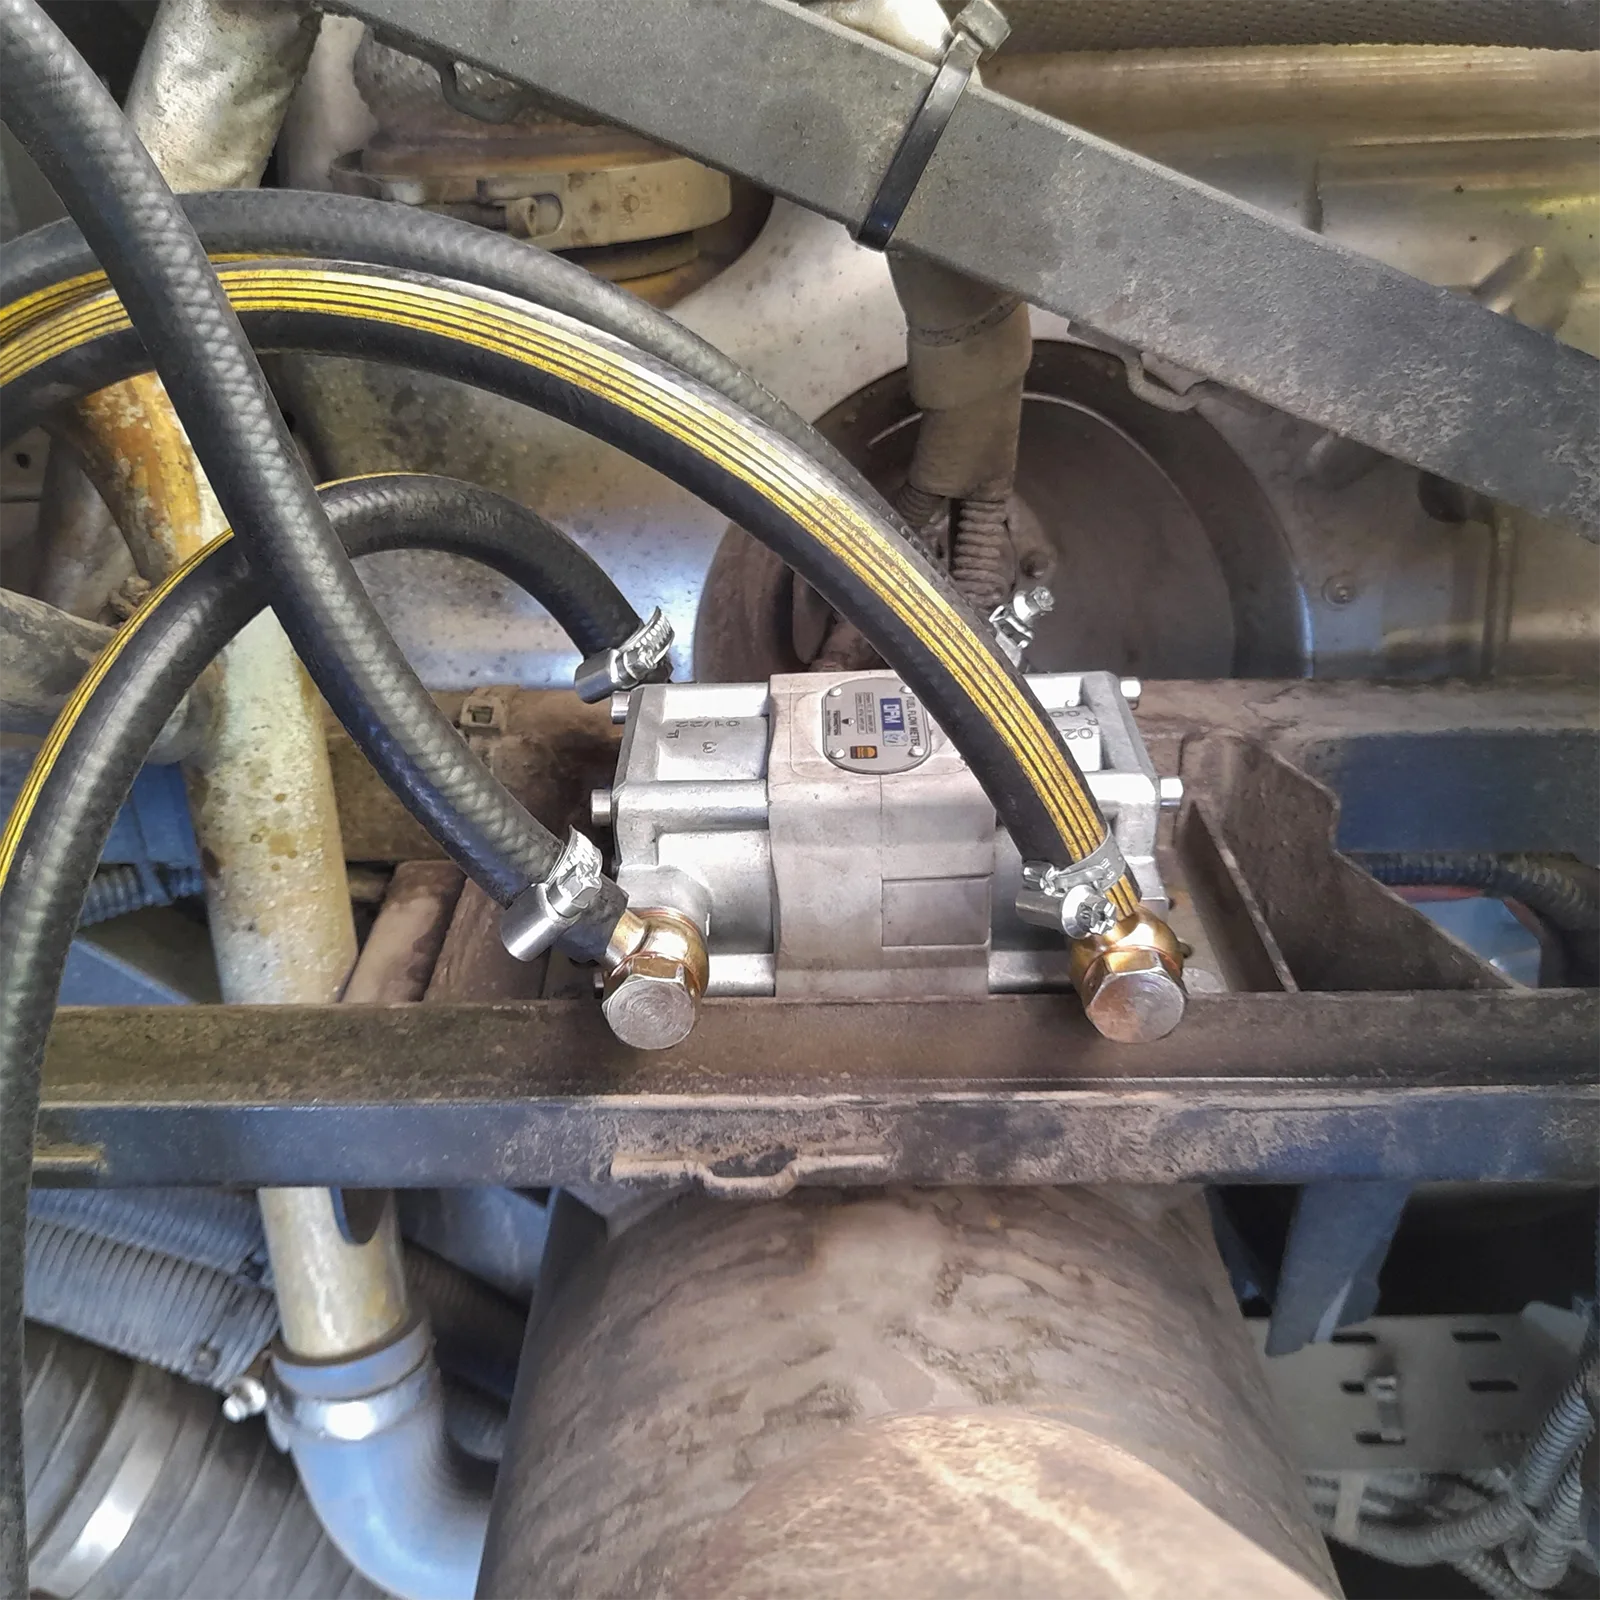 Closer view of DFM 250DS7 wireless fuel flow meter mounted on the bus frame